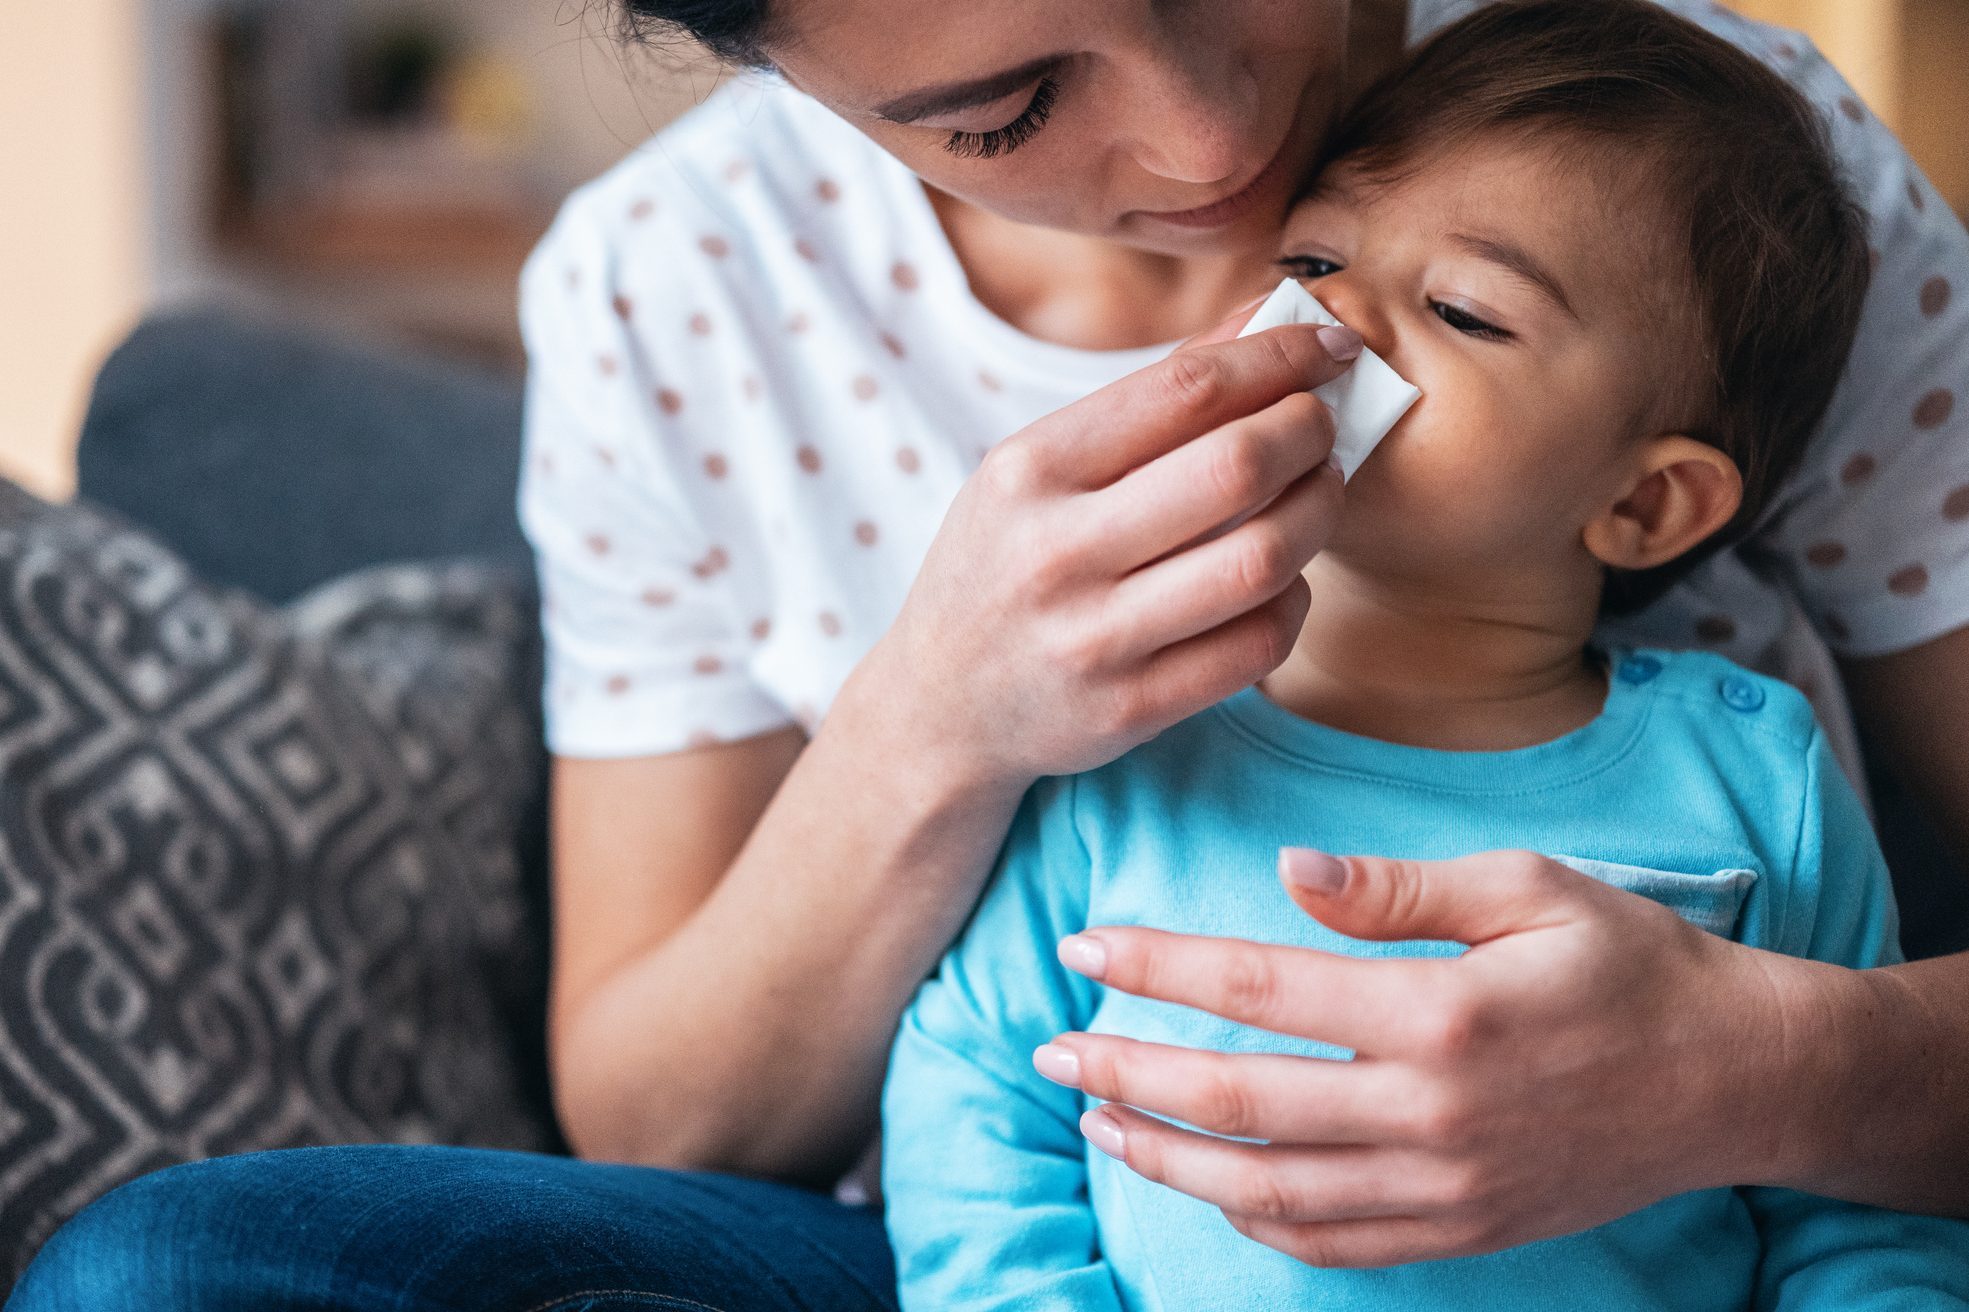 8 Whooping Cough Symptoms Everyone Should Know